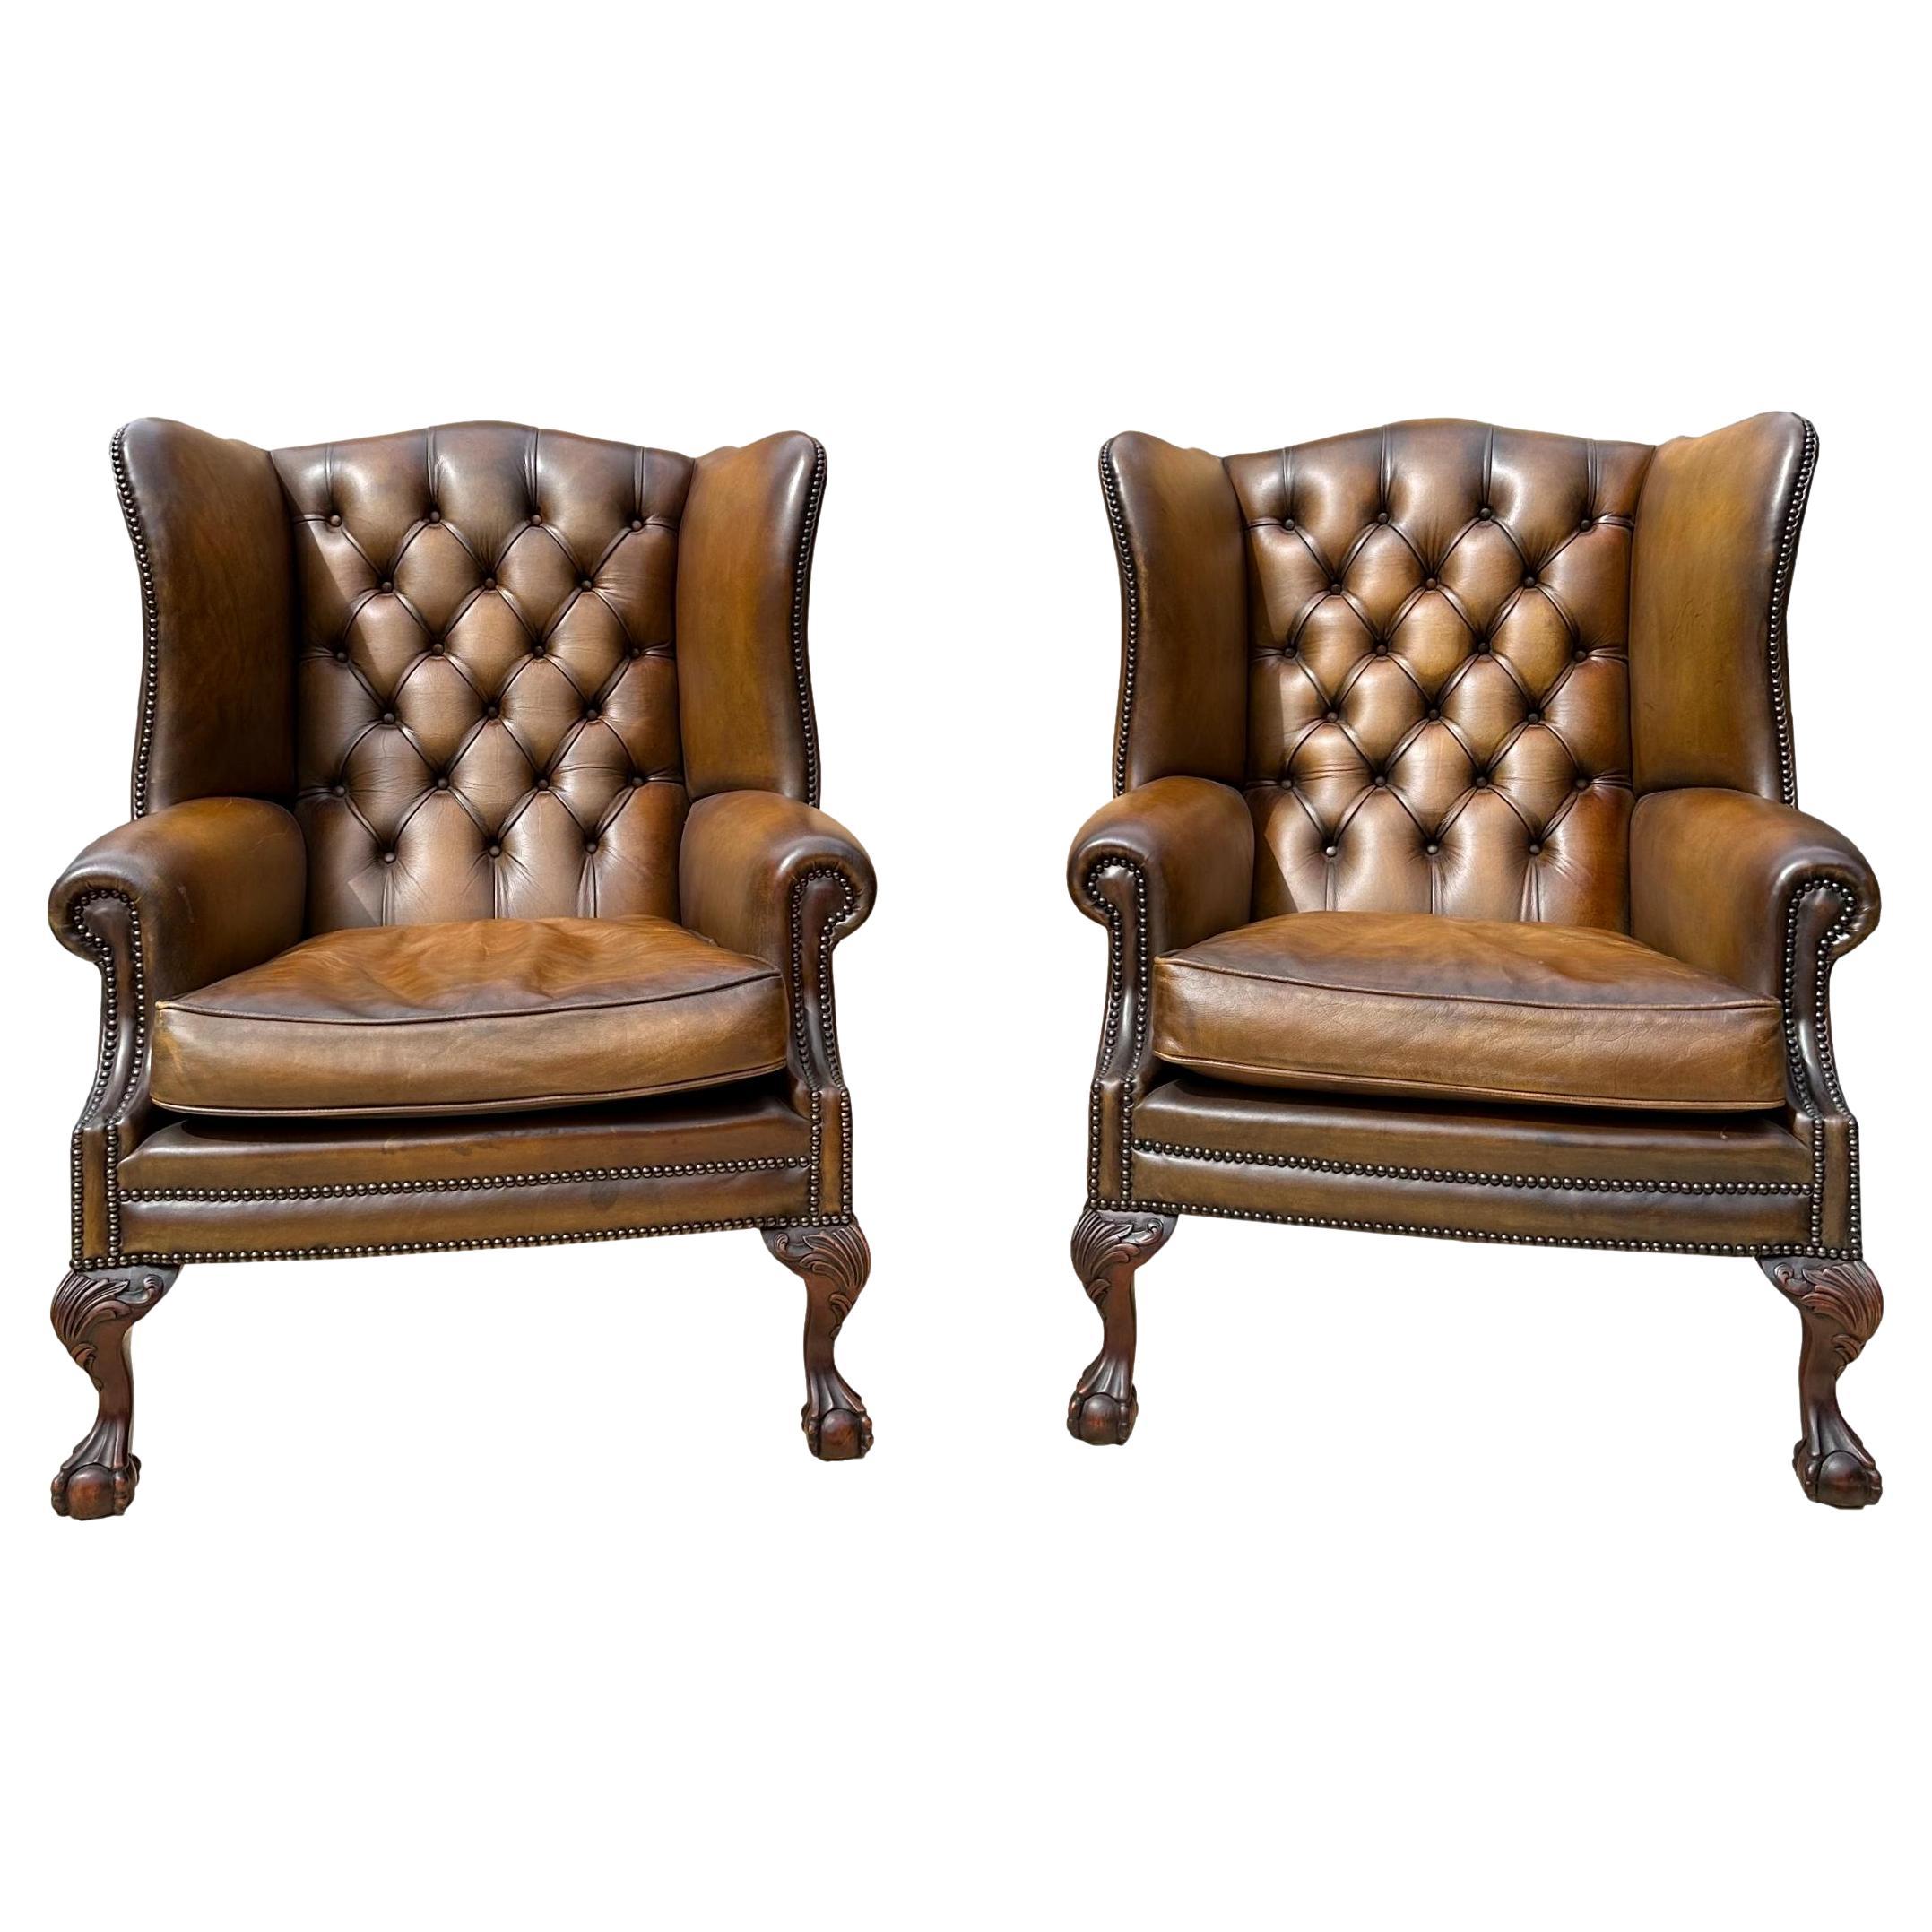 Pair of Leather Wing Back Tufted Chairs on Ball & Claw Feet, English, ca. 1920. For Sale